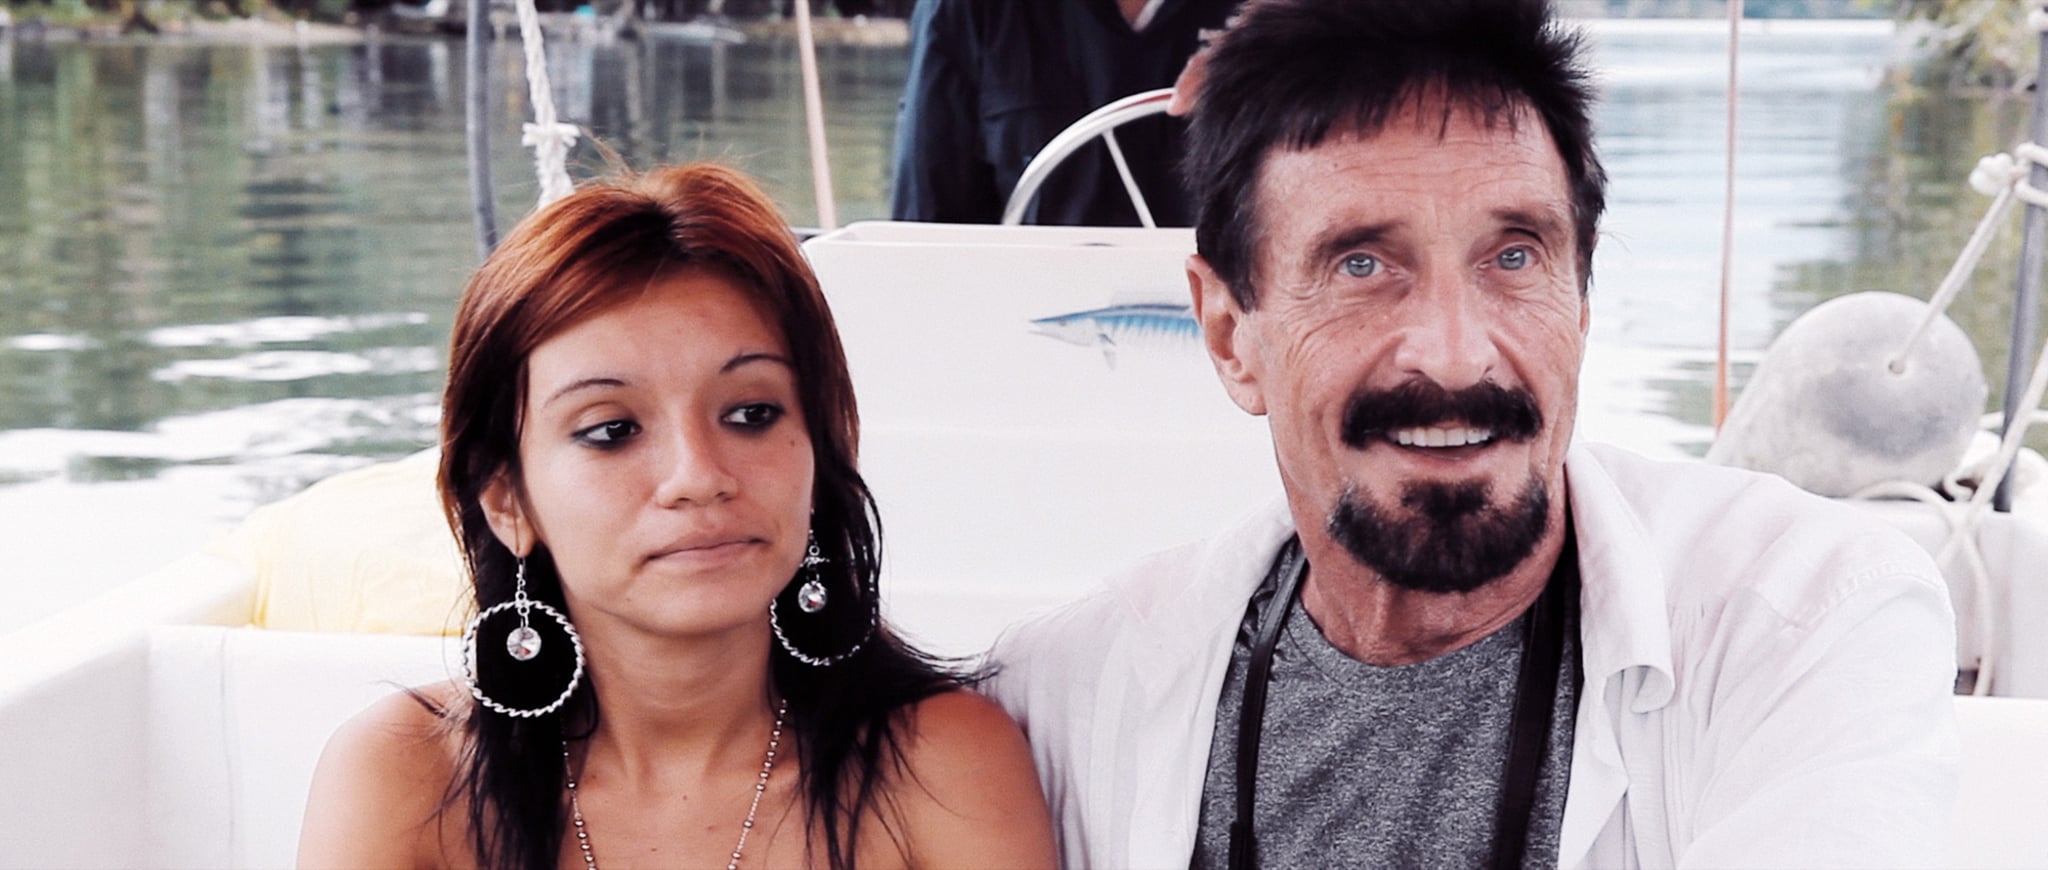 RUNNING WITH THE DEVIL: THE WILD WORLD OF JOHN MCAFEE, from left: Samantha Herrera, John McAfee, 2022. Netflix /Courtesy Everett Collection